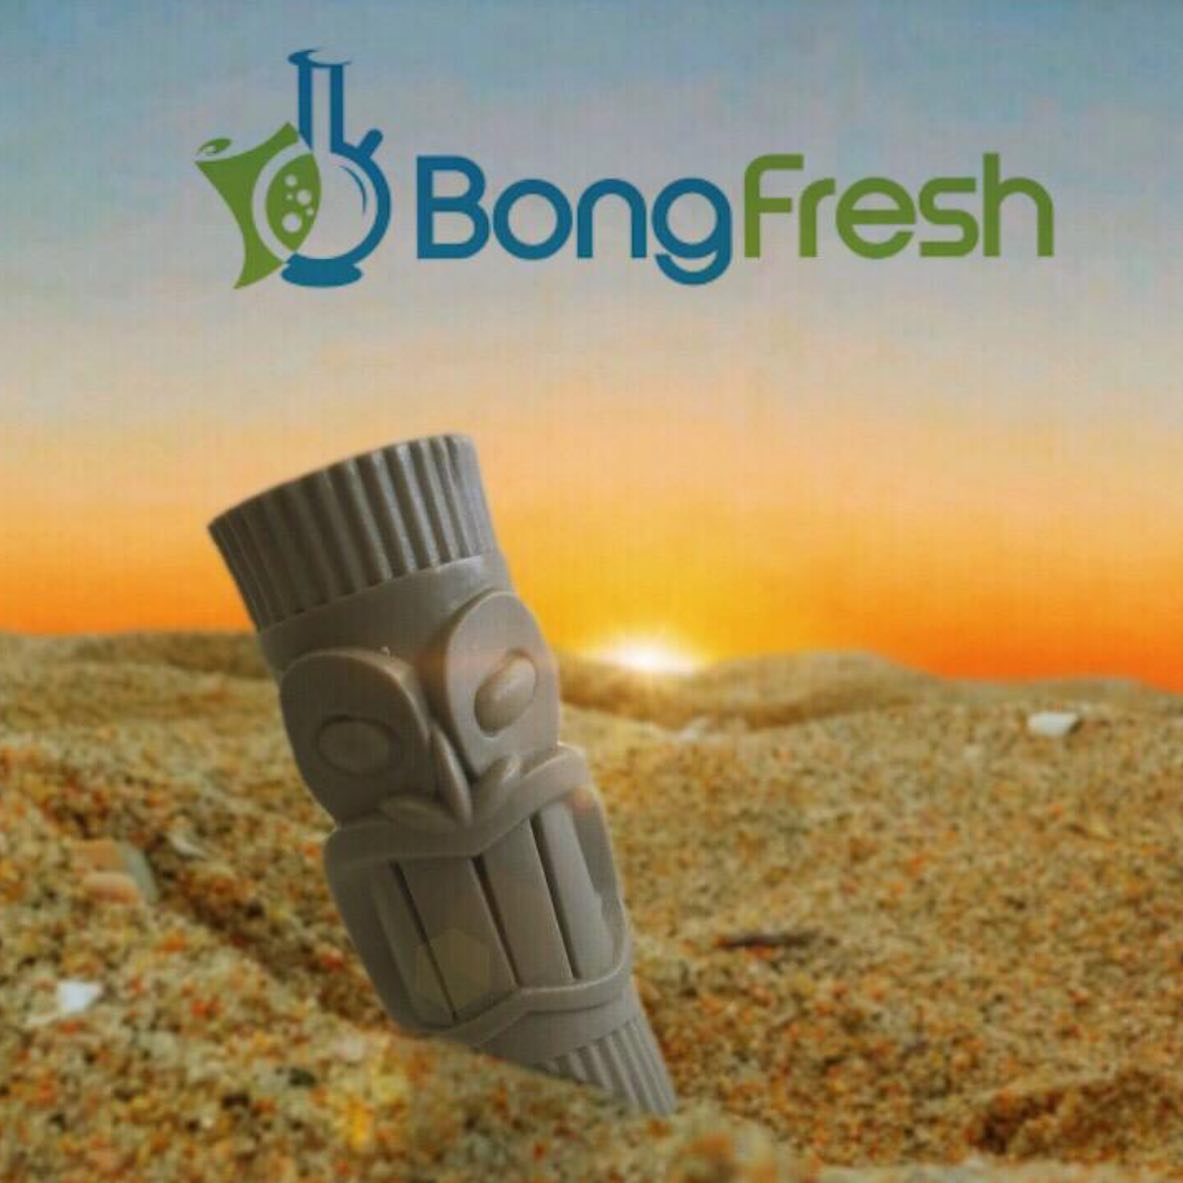 One of the top publications of @bongfreshofficial which has 294 likes and 14 comments